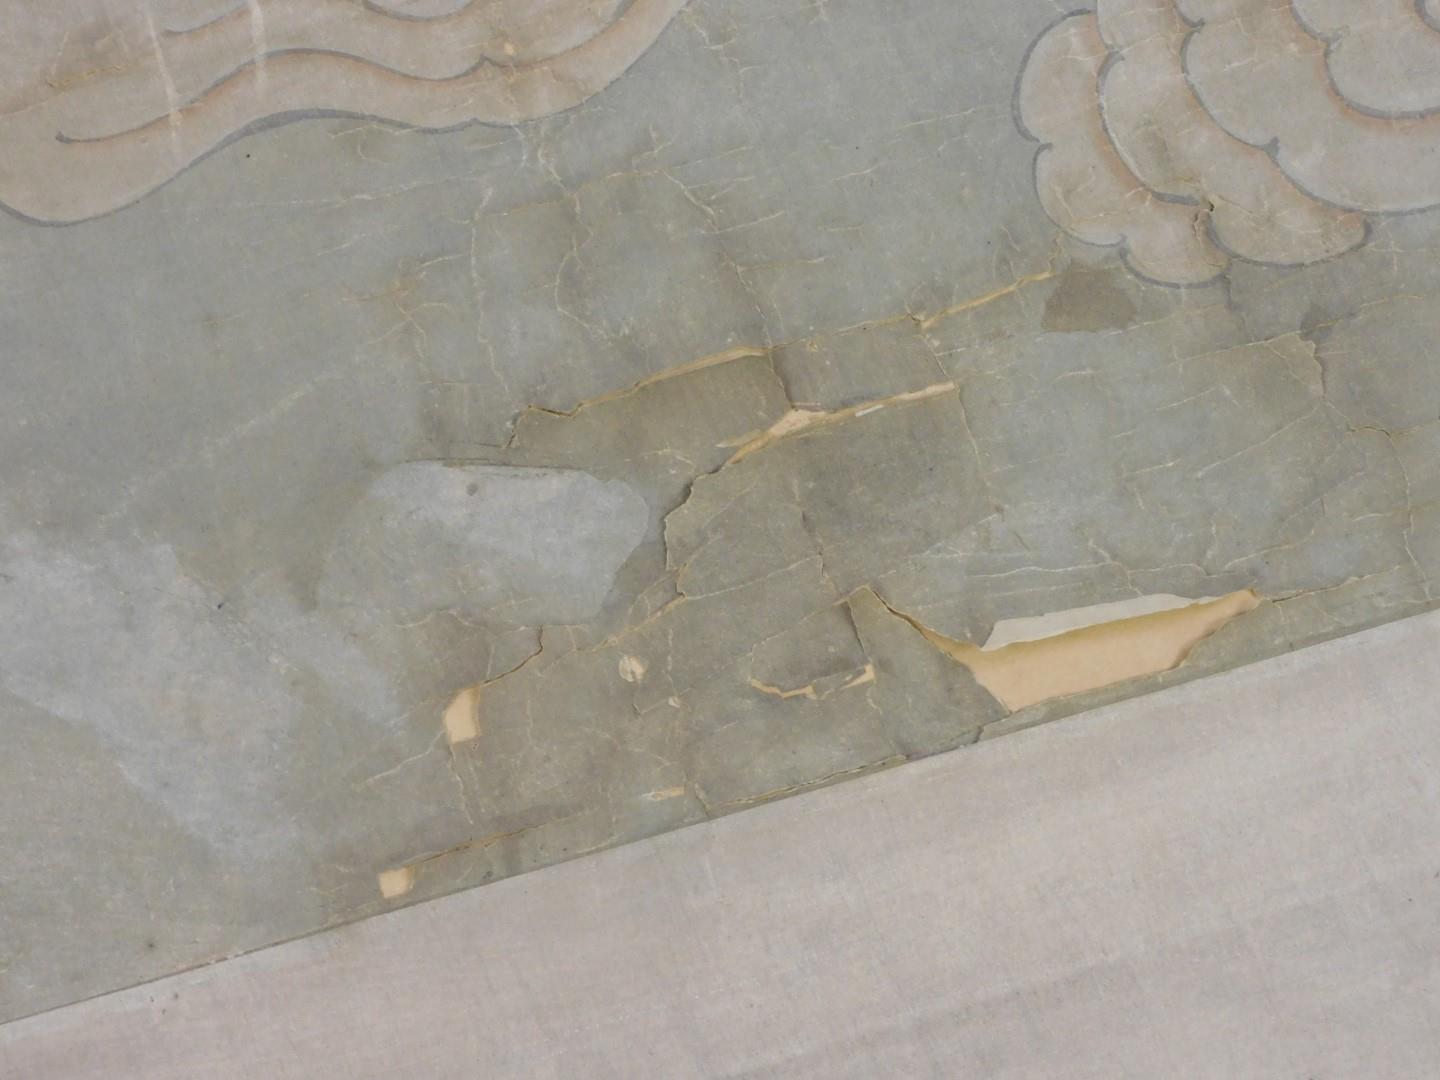 A Chinese scroll, painted with the figure of the goddess of compassion Guan Yin standing on a - Image 3 of 7